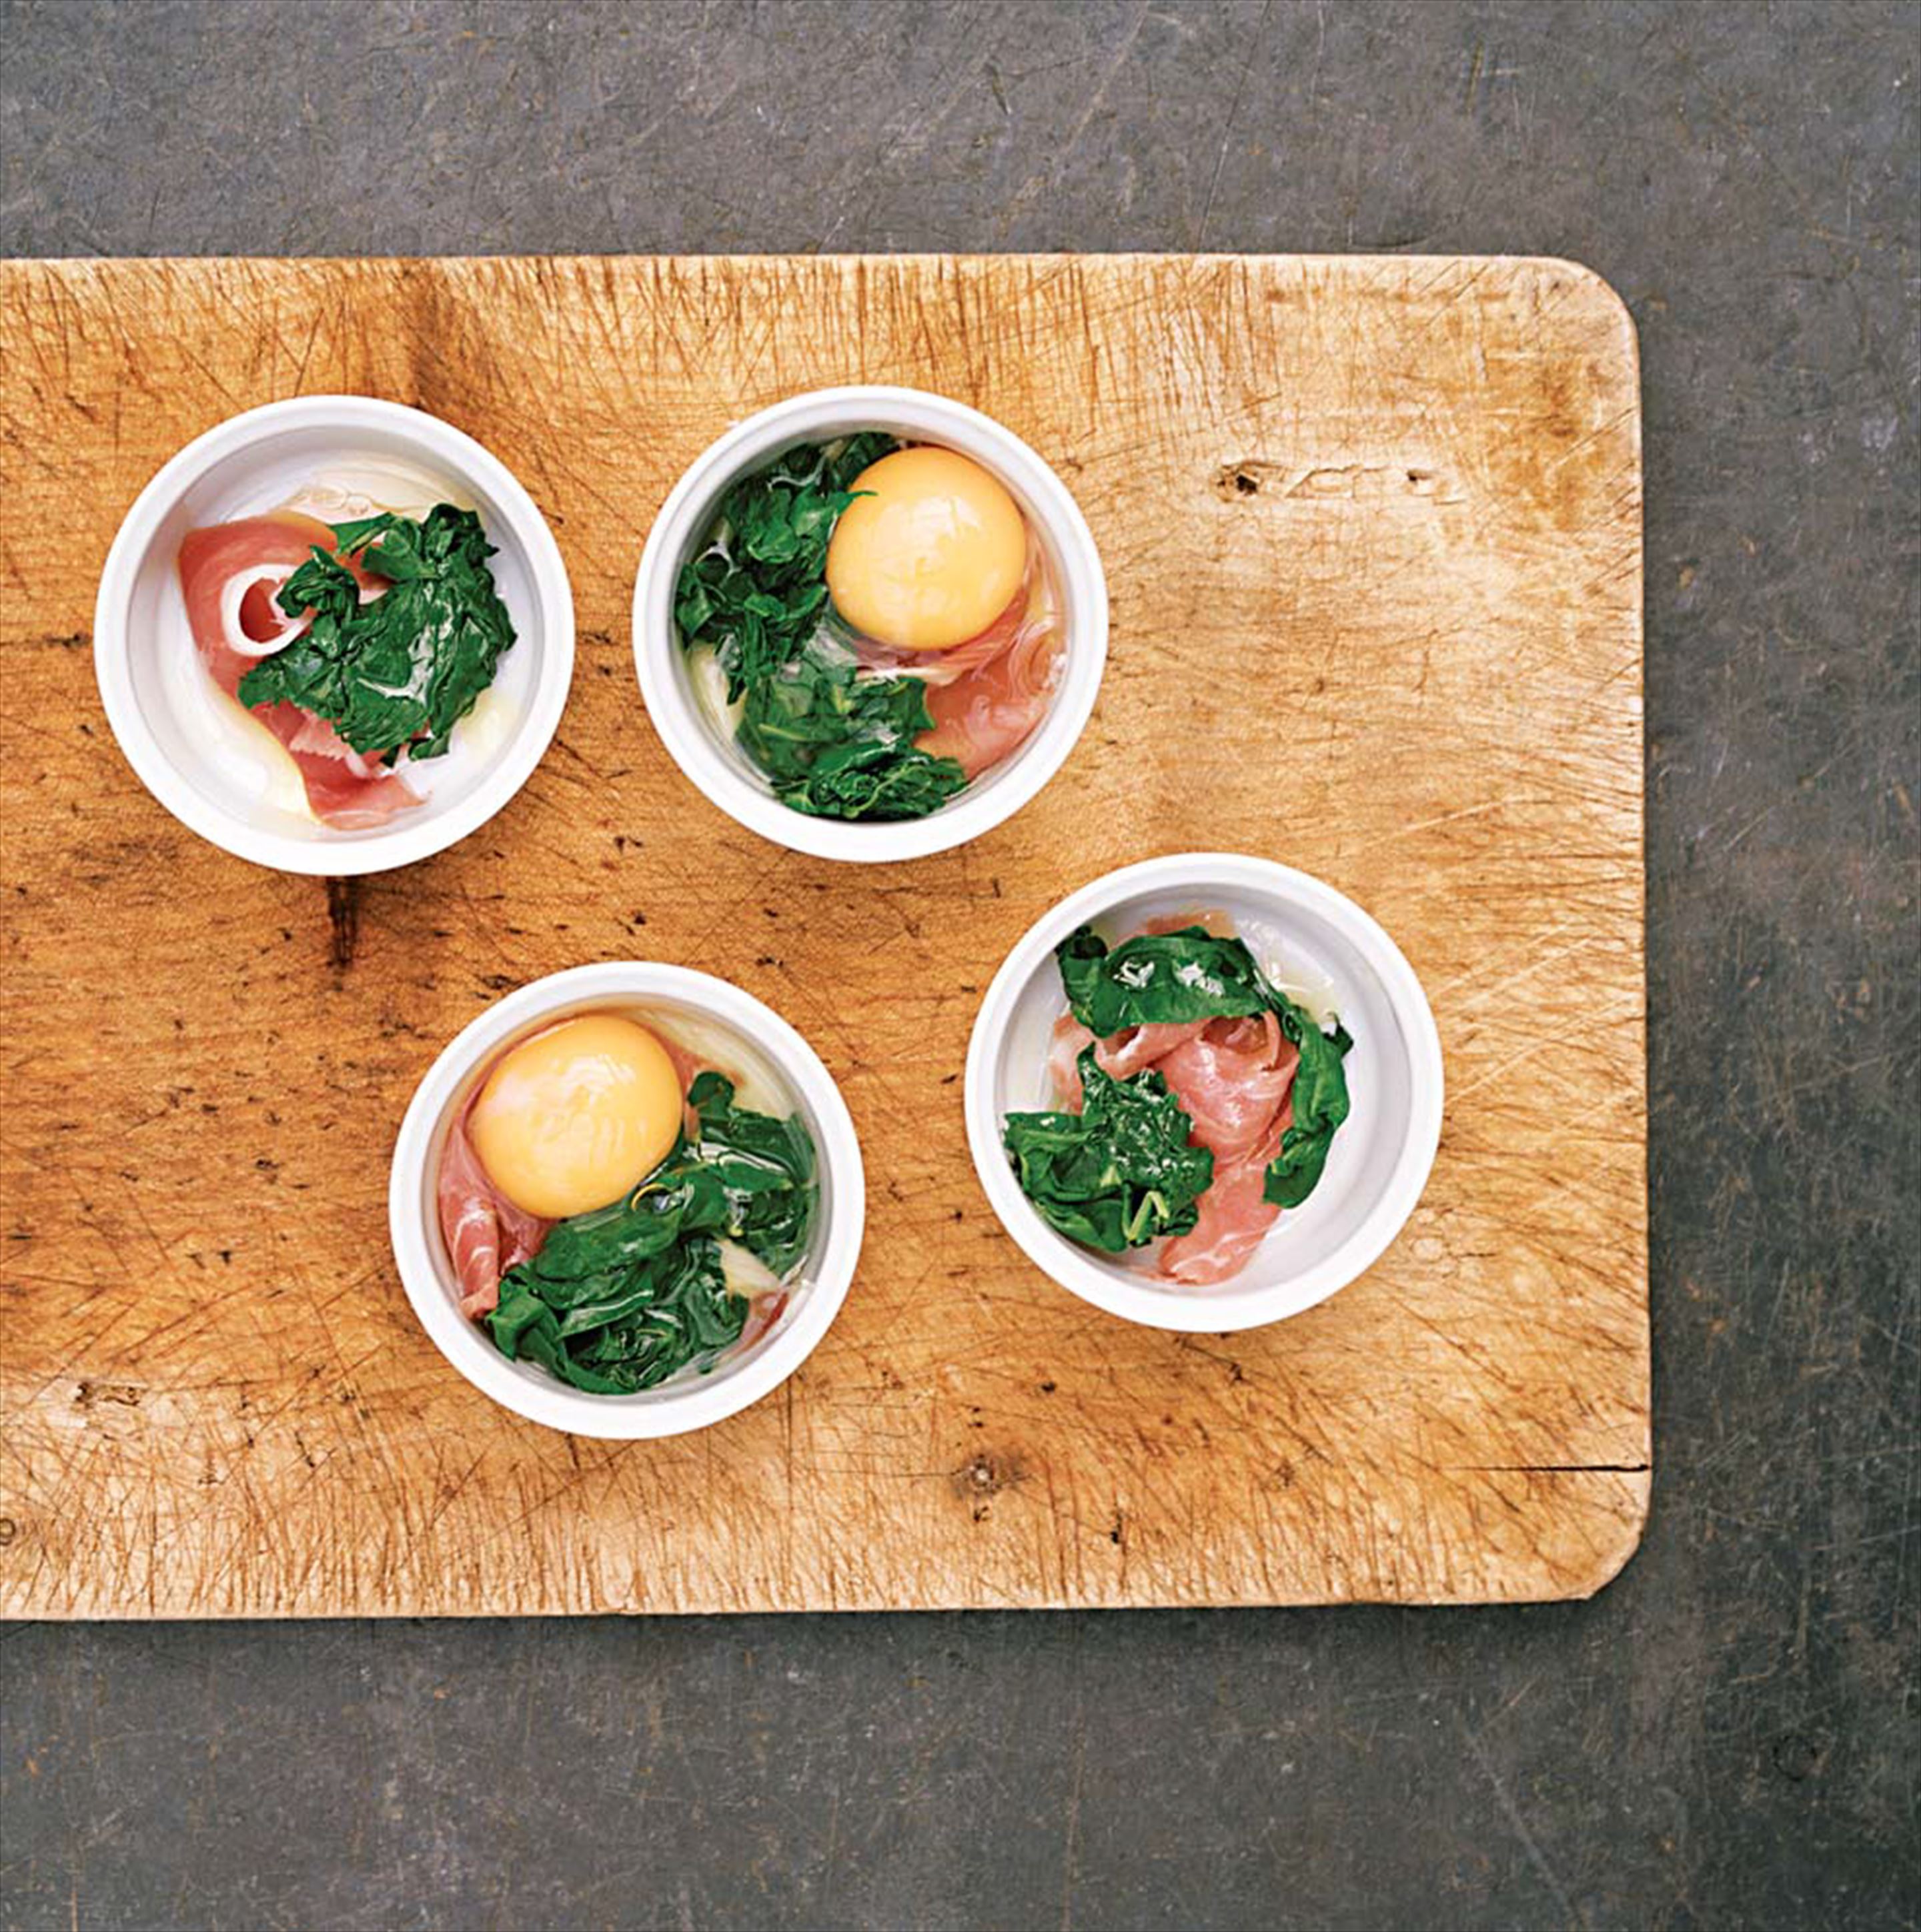 Oeufs en cocotte with spinach and parma ham